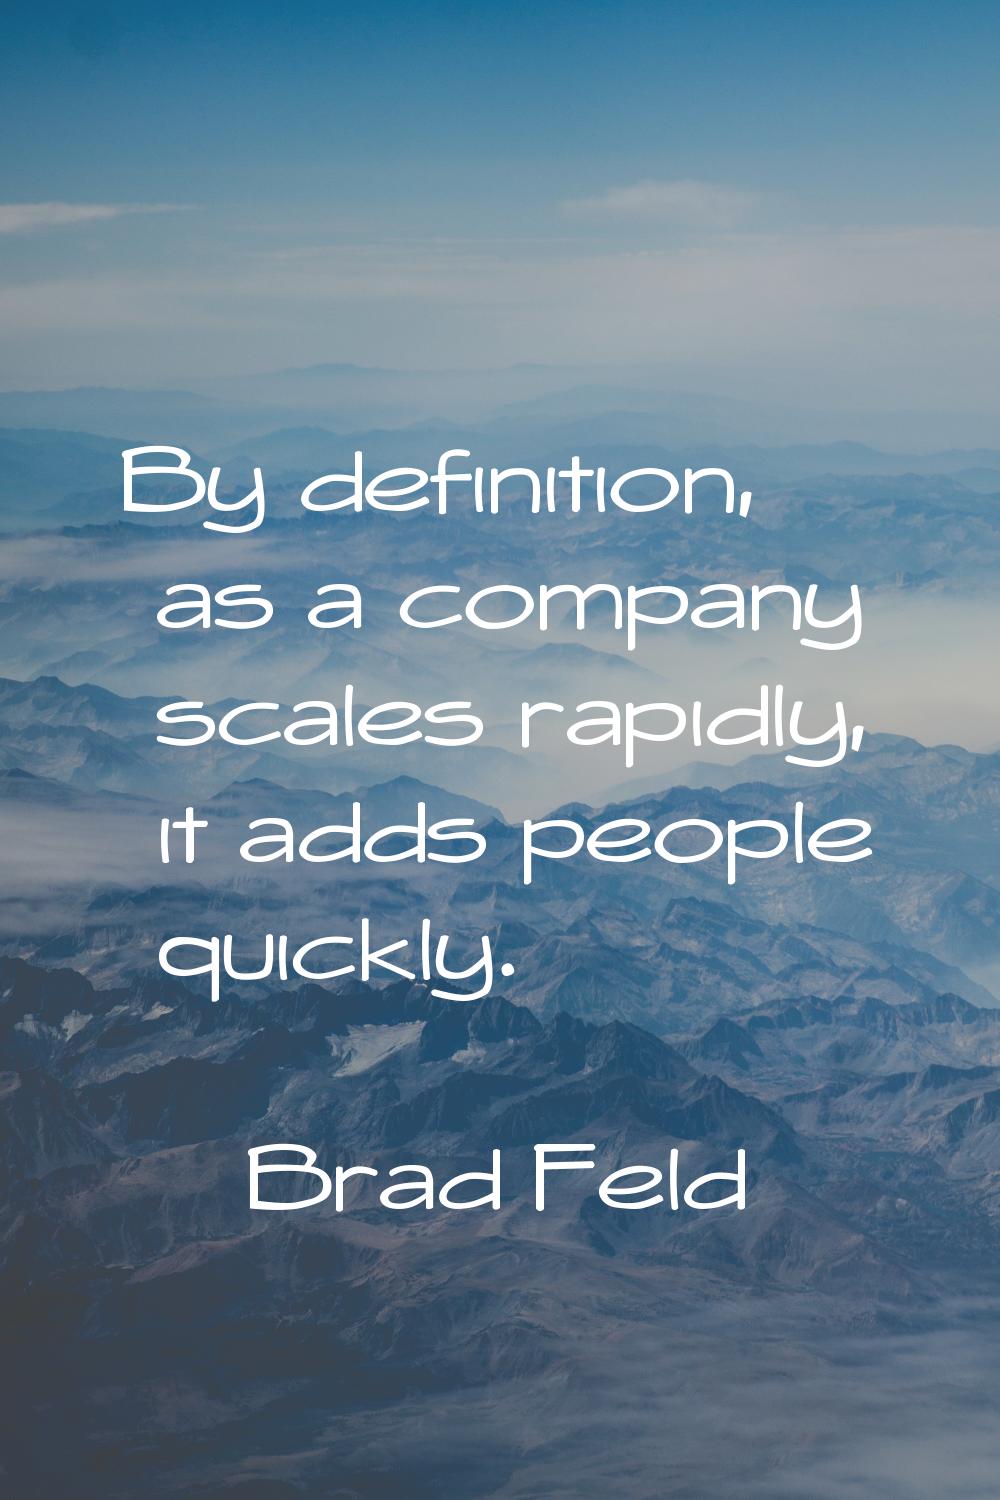 By definition, as a company scales rapidly, it adds people quickly.